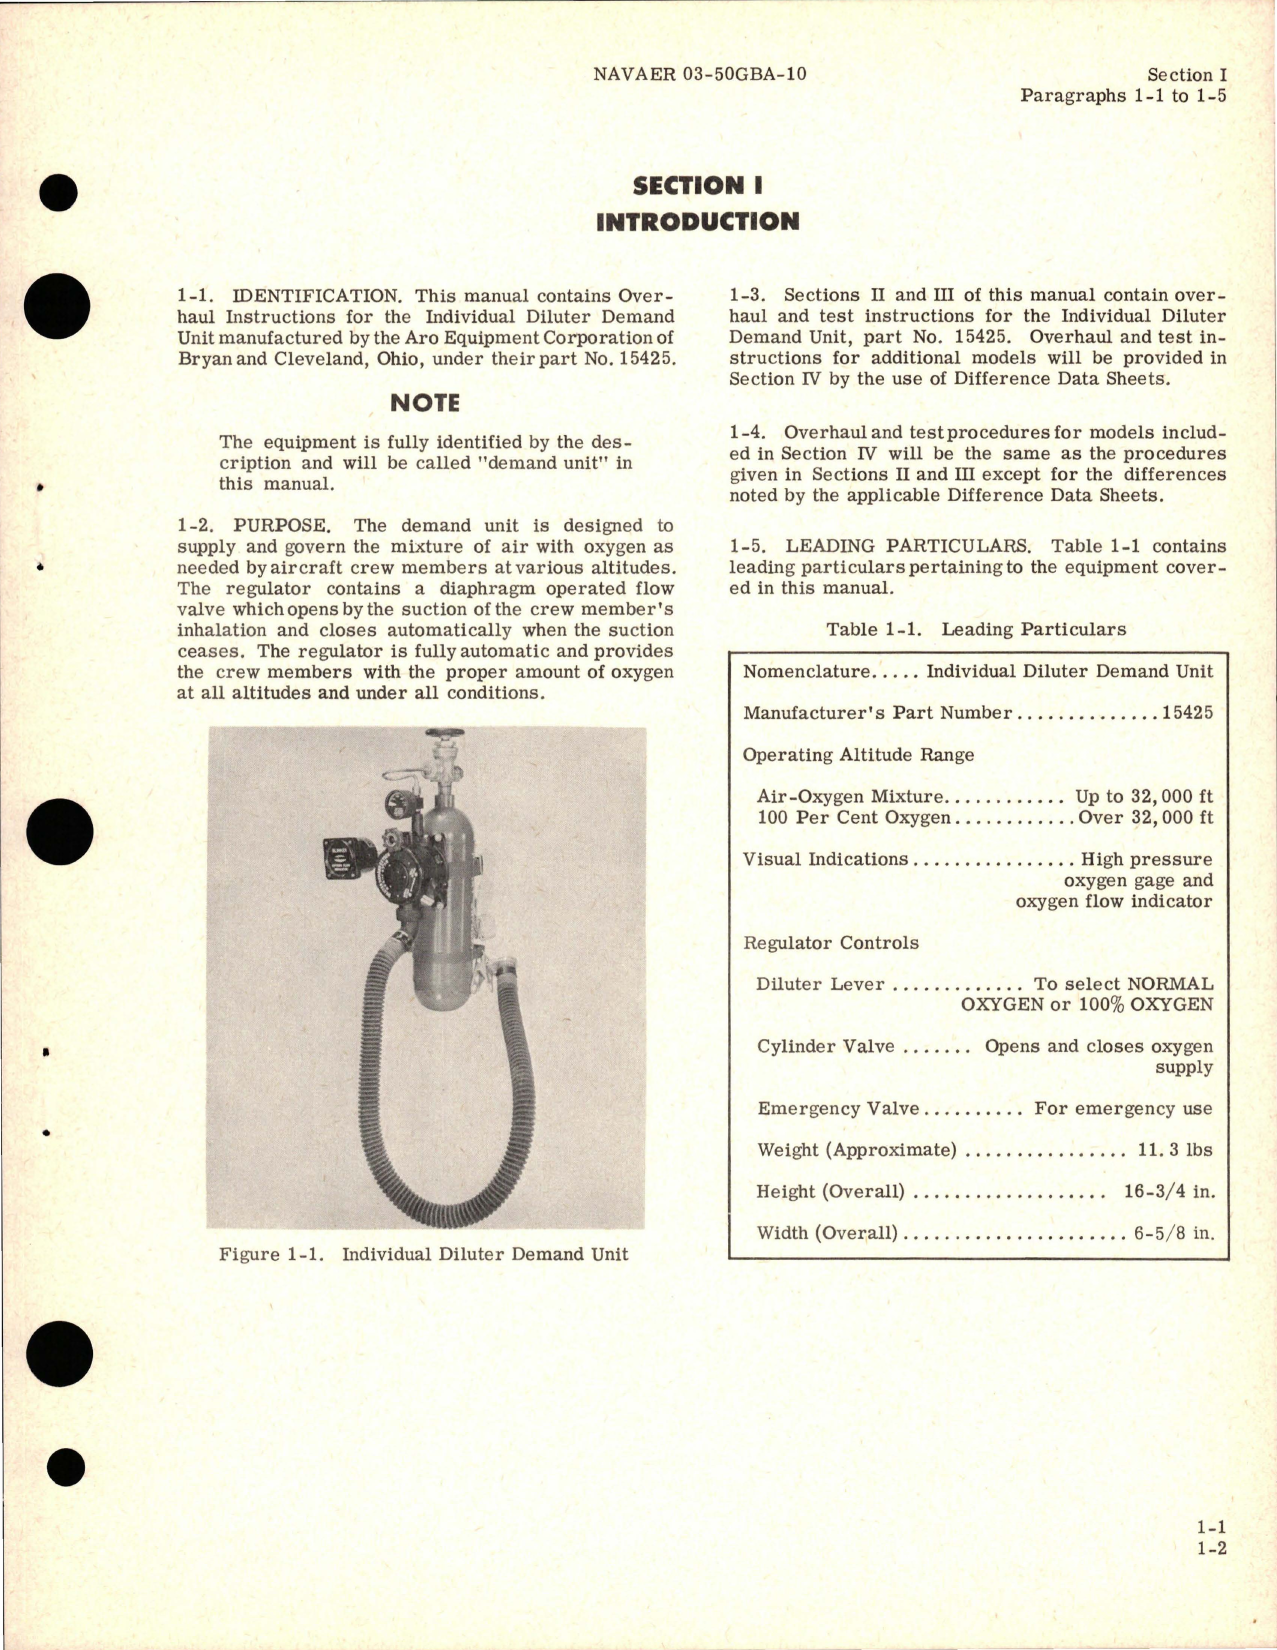 Sample page 5 from AirCorps Library document: Overhaul Instructions for Portable High Pressure Oxygen Unit - Part 15425 